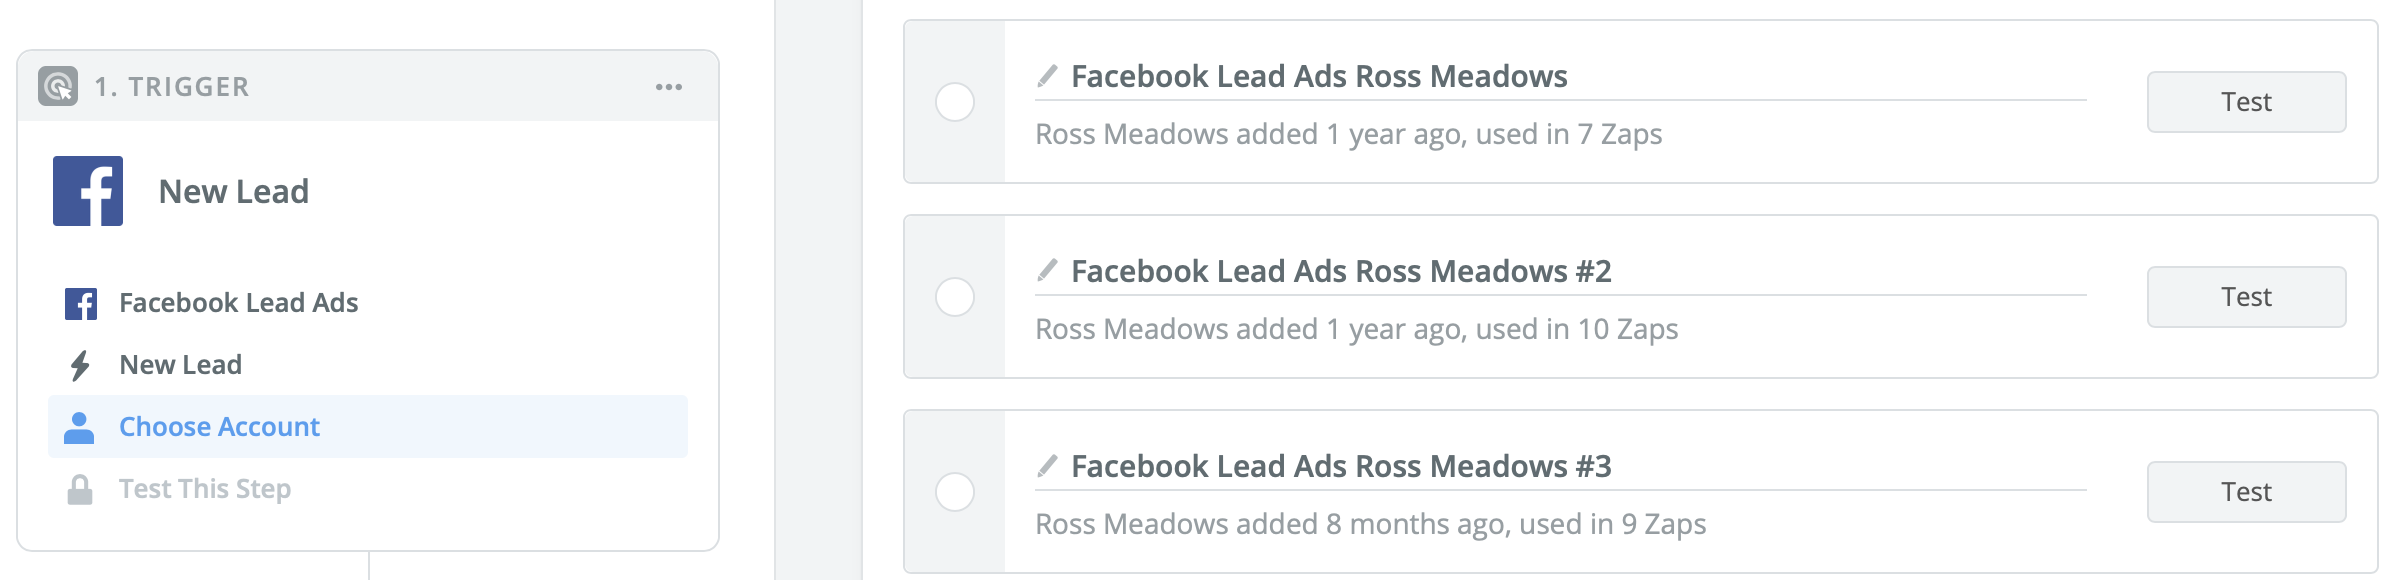 Connect Facebook to Zapier to email lead ads automatically